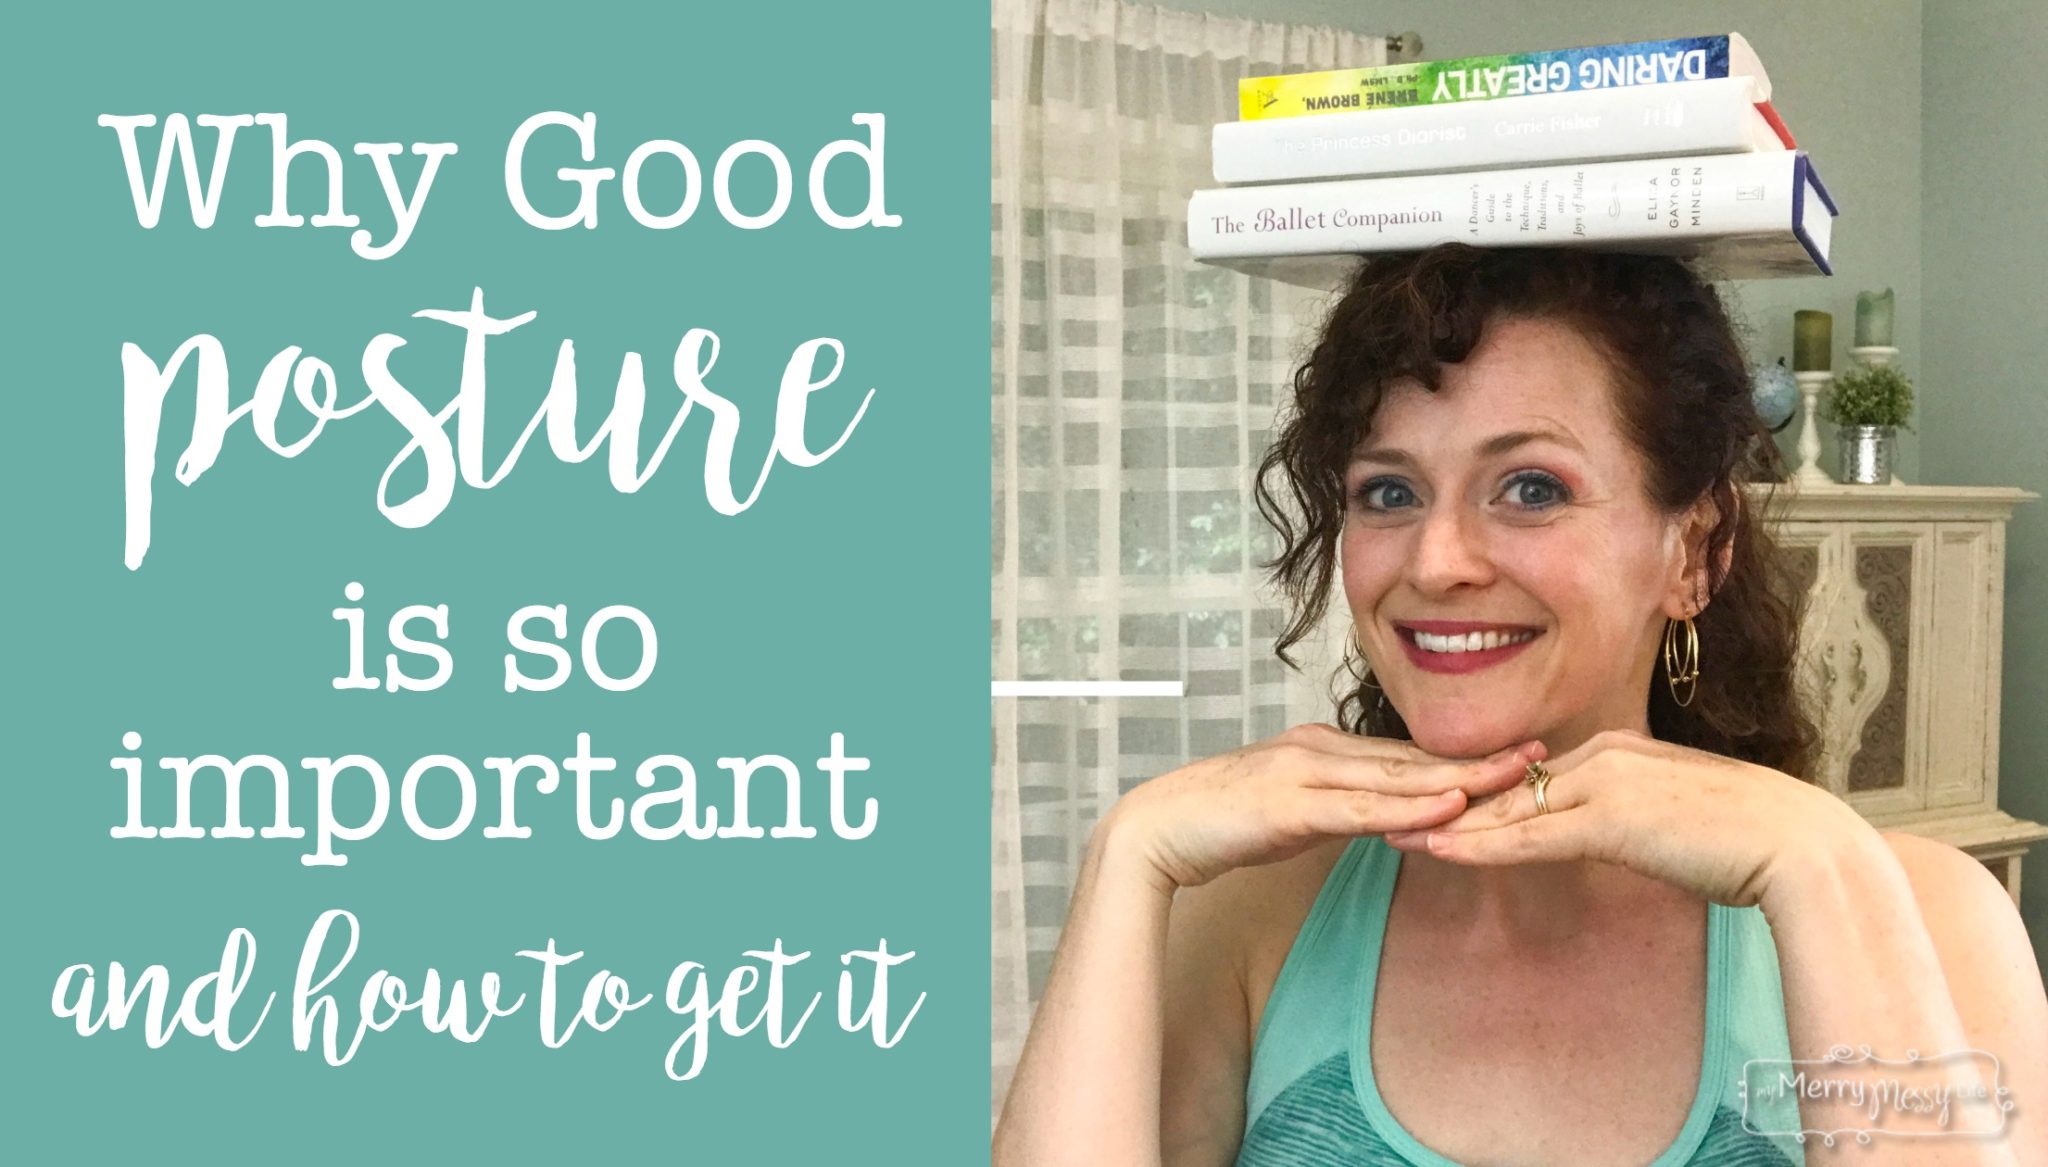 Why Good Posture is so Important and How to Get It